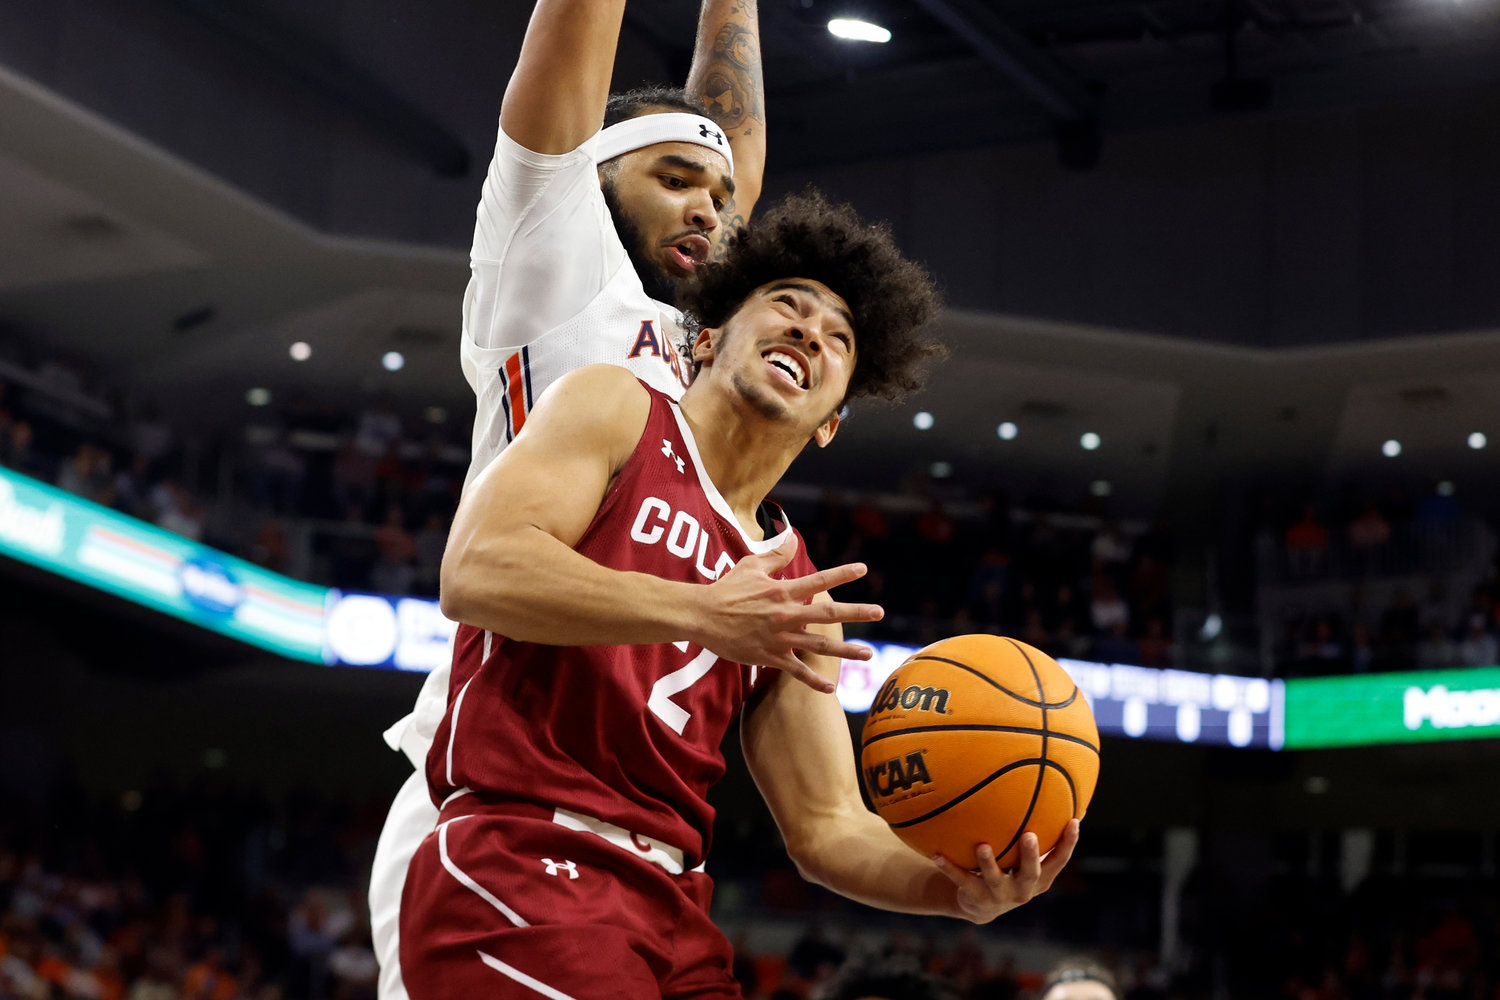 Colgate guard Braeden Smith (2) tries to shoot against Auburn forward Johni Broome during the first half of Friday night's game in Auburn, Ala. Auburn won 93-66.